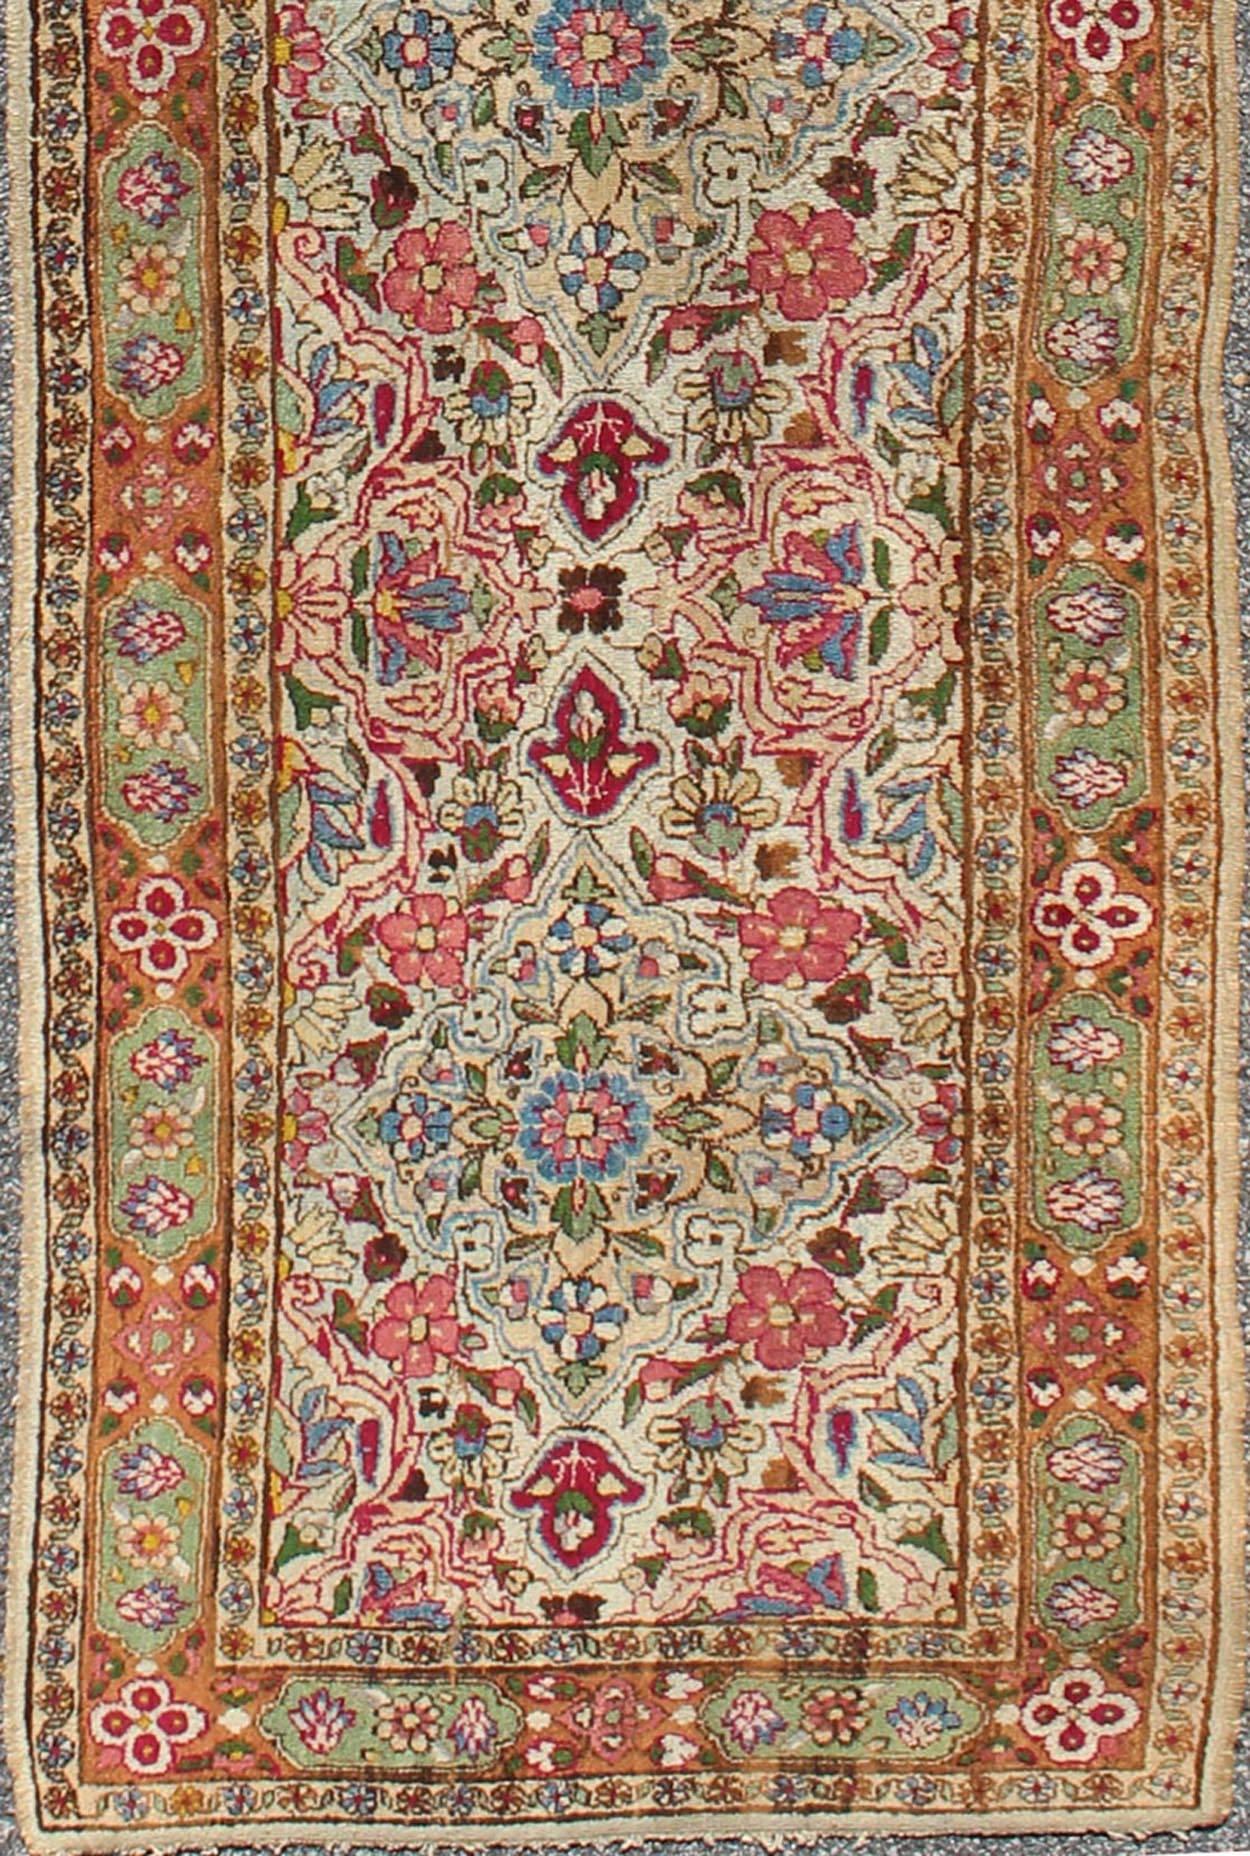 Elegant Ivory Floral Indian Amritsar Antique Runner in Red, Pink, Blue, Green, rug a-0107, country of origin / type: India / Amritsar, circa 1910

Remarkable craftsmanship with regal designs and palette choices came out of India during the 20th